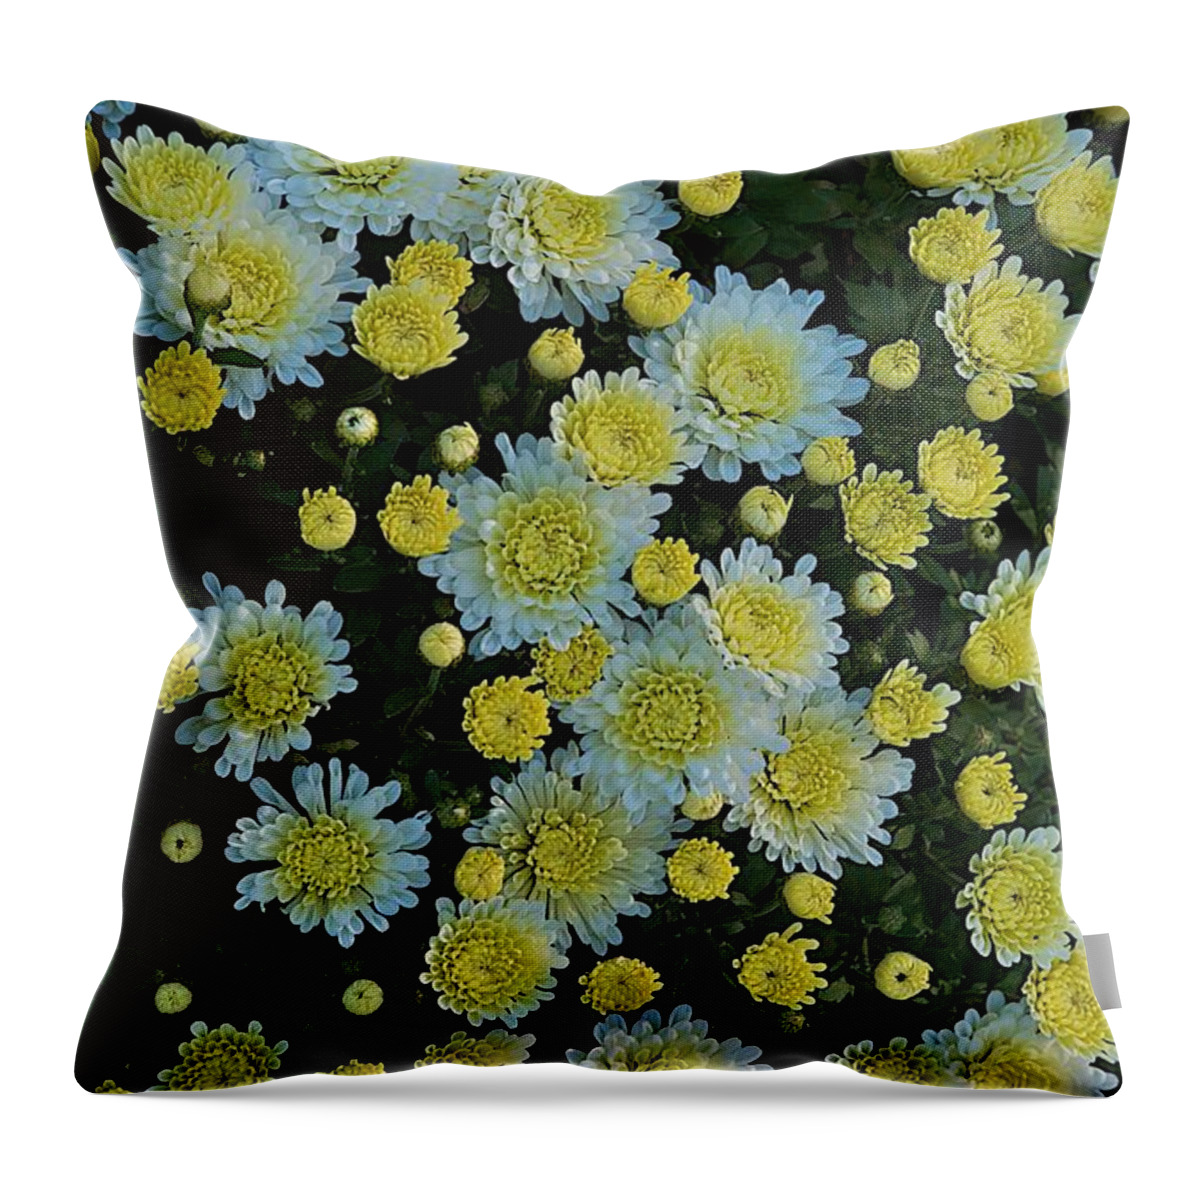 Flower Throw Pillow featuring the photograph Mums by Joseph Yarbrough